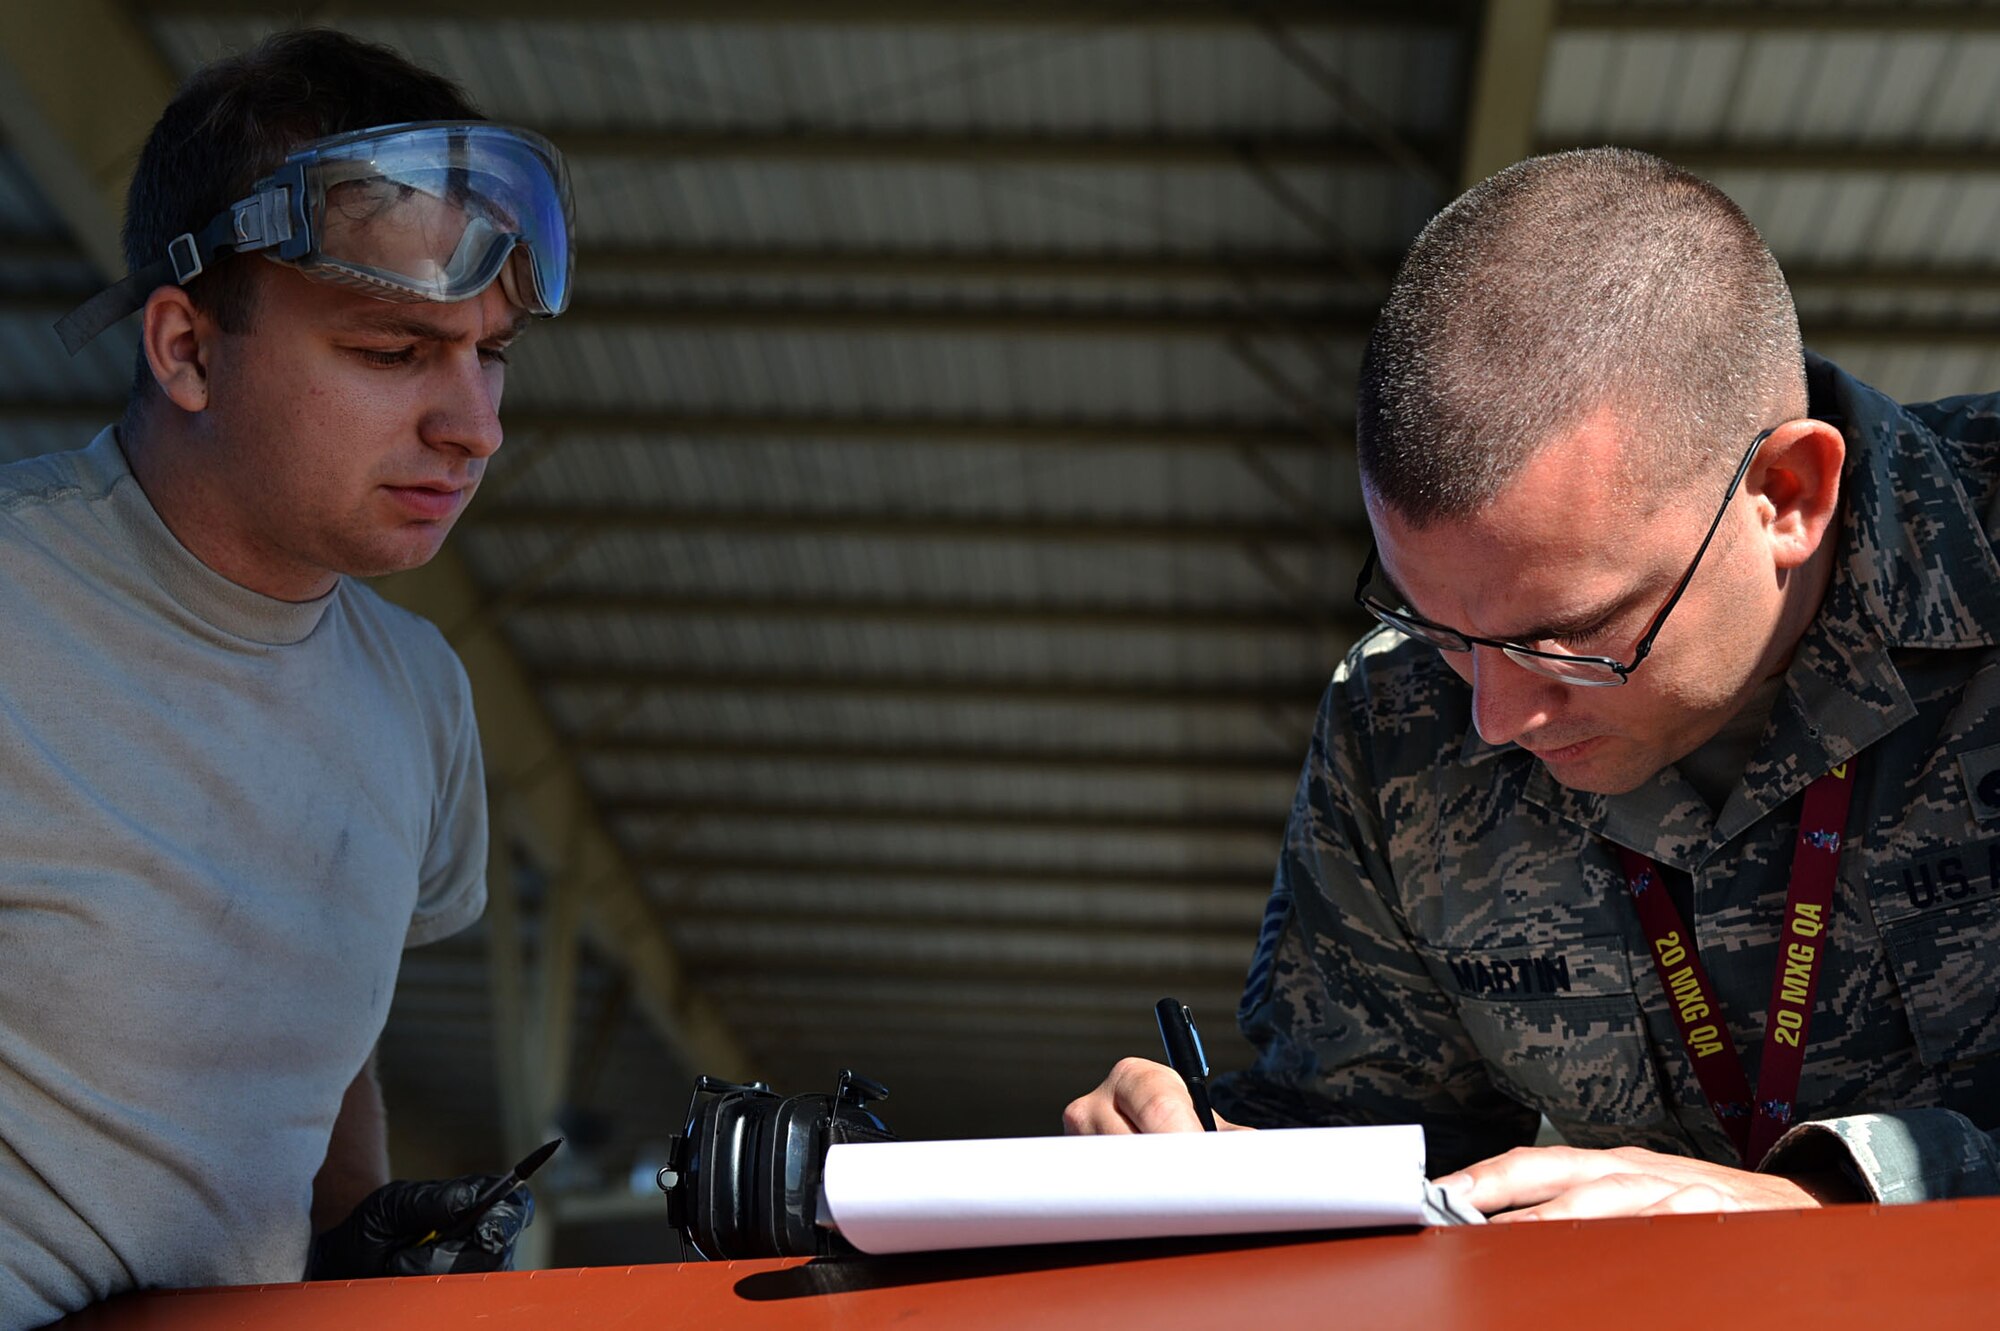 U.S. Airmen assigned to the 20th Maintenance Group maintenance quality assurance flight are tasked with providing oversight and mentorship to various maintenance Airmen at Shaw Air Force Base, S.C.